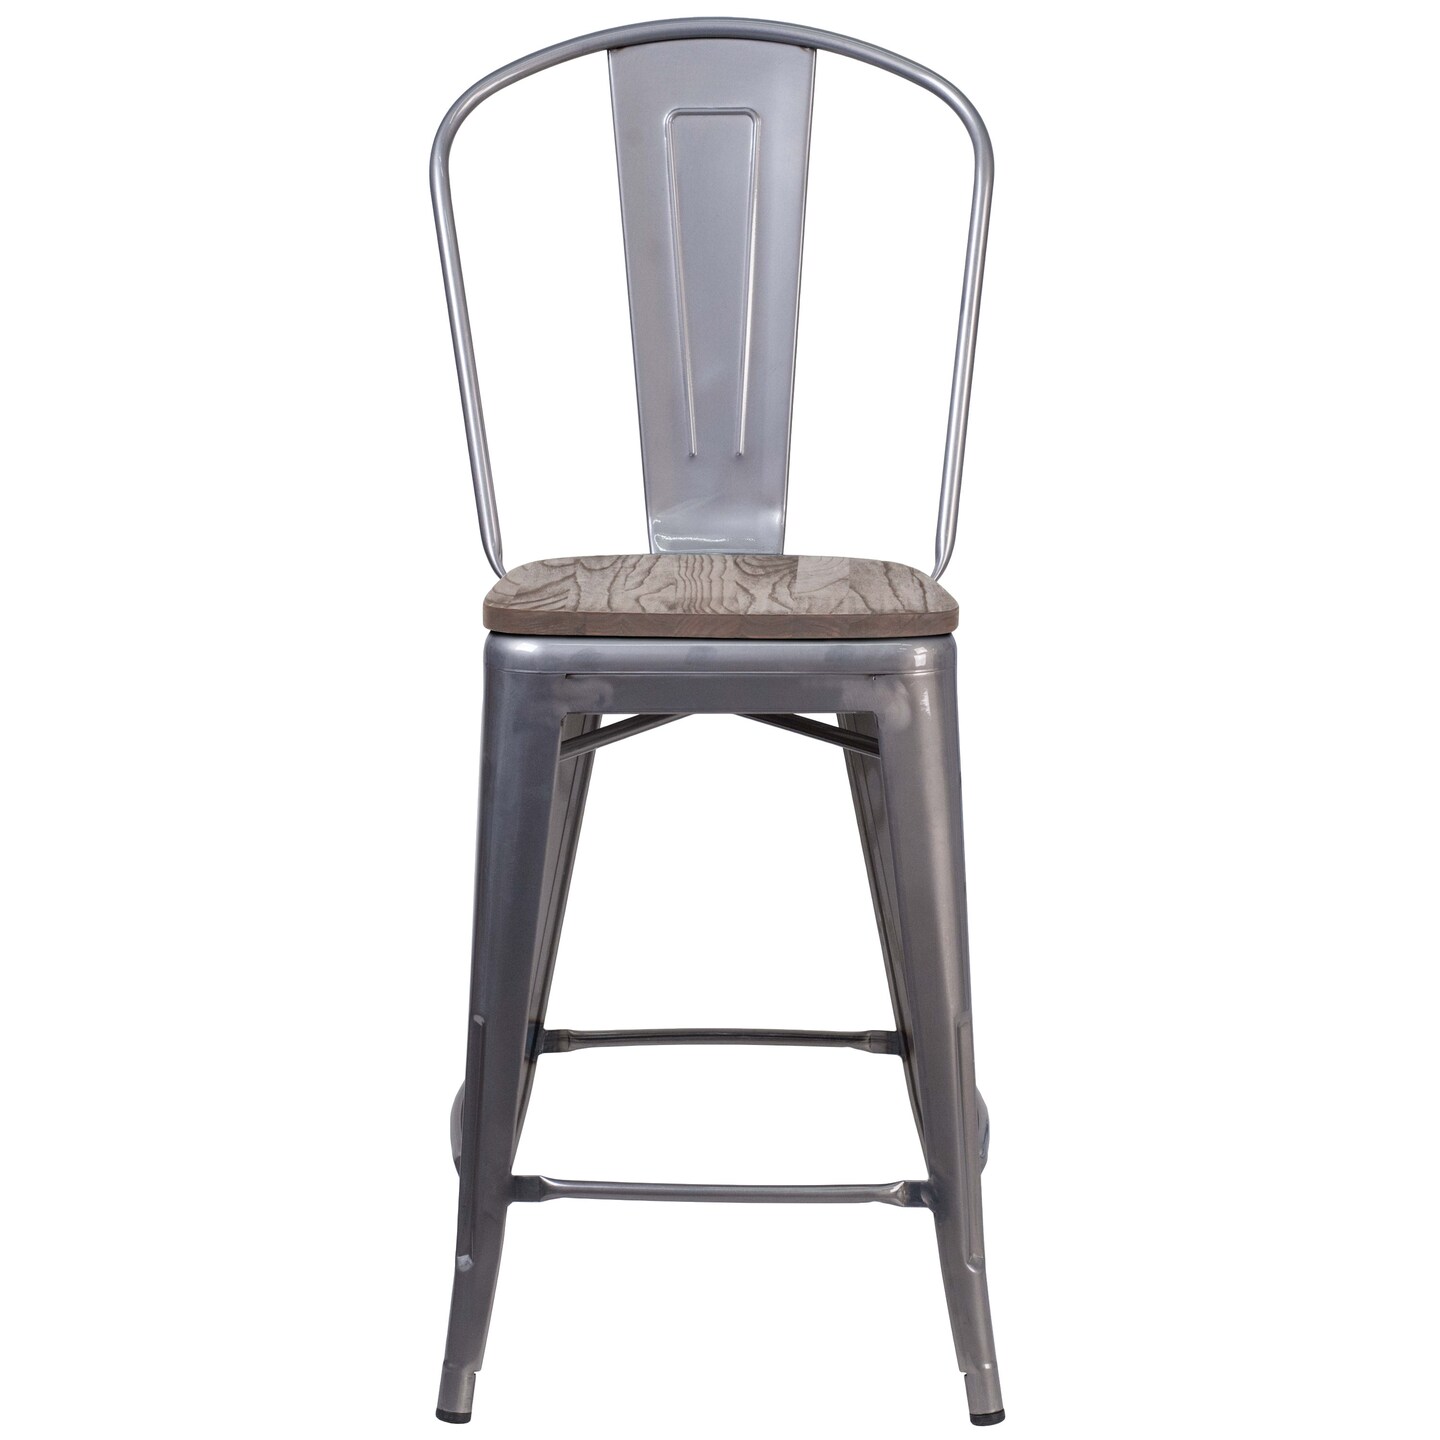 Merrick Lane Vesemir Stool with Powder Coated Metal Frame and Textured Wooden Seat